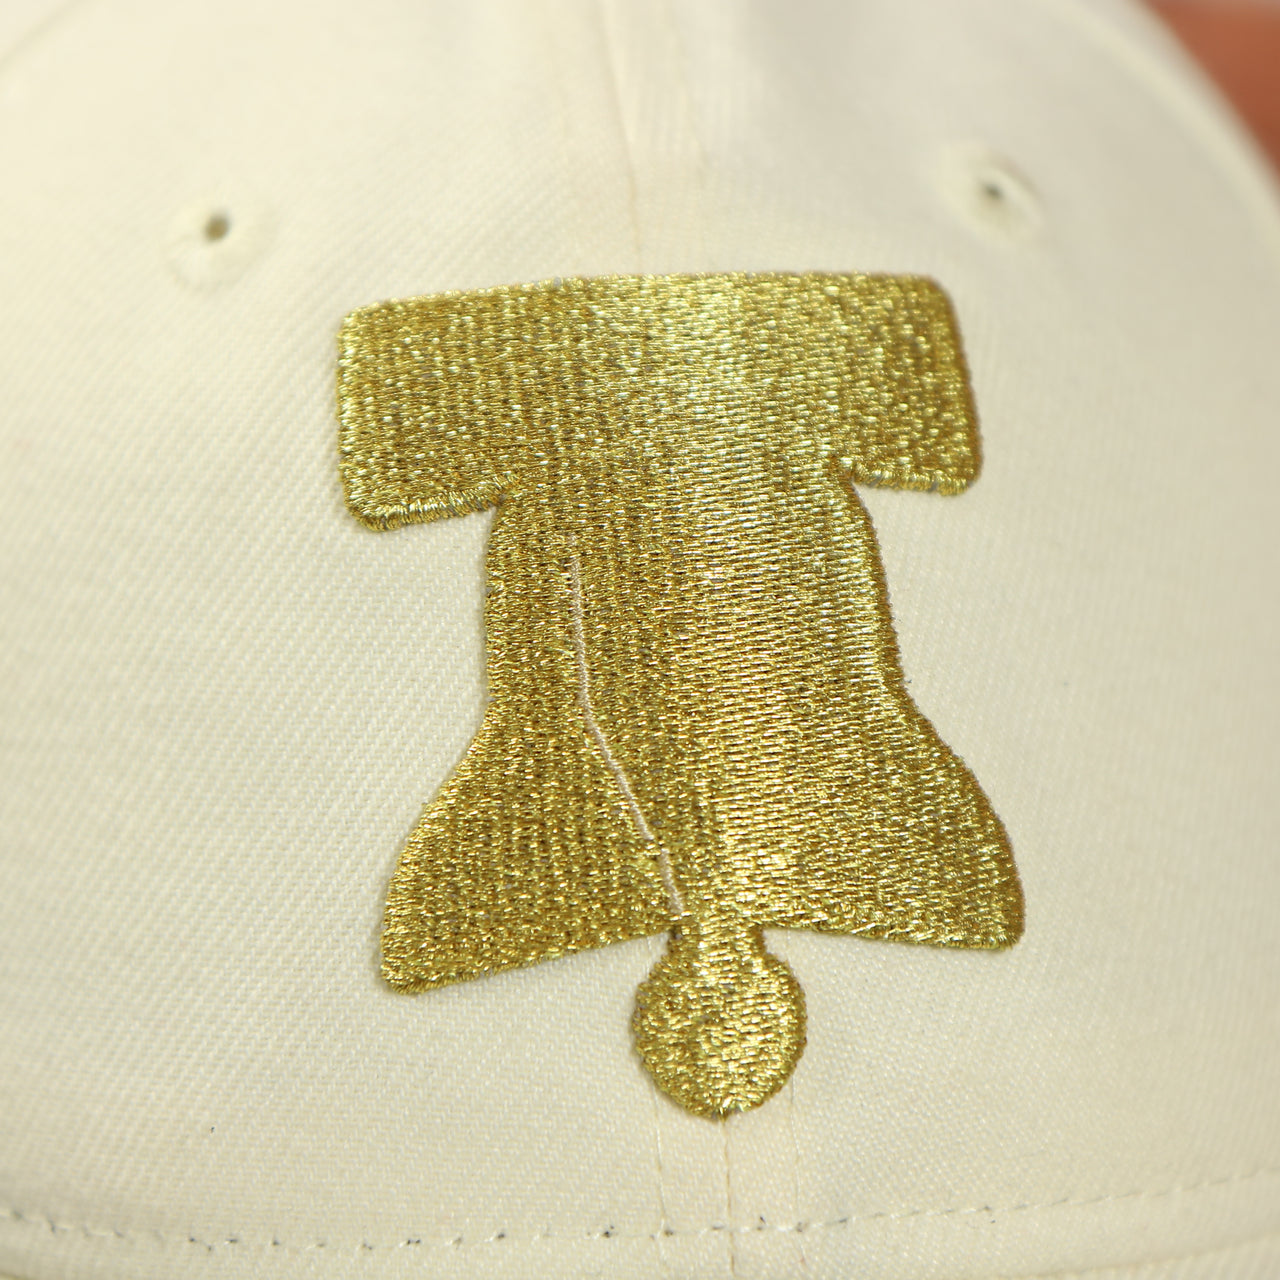 liberty bell logo on the Sixers Snapback hat  Phildelphia 76ers vintage white Dad hat with gold embroidery New era 920